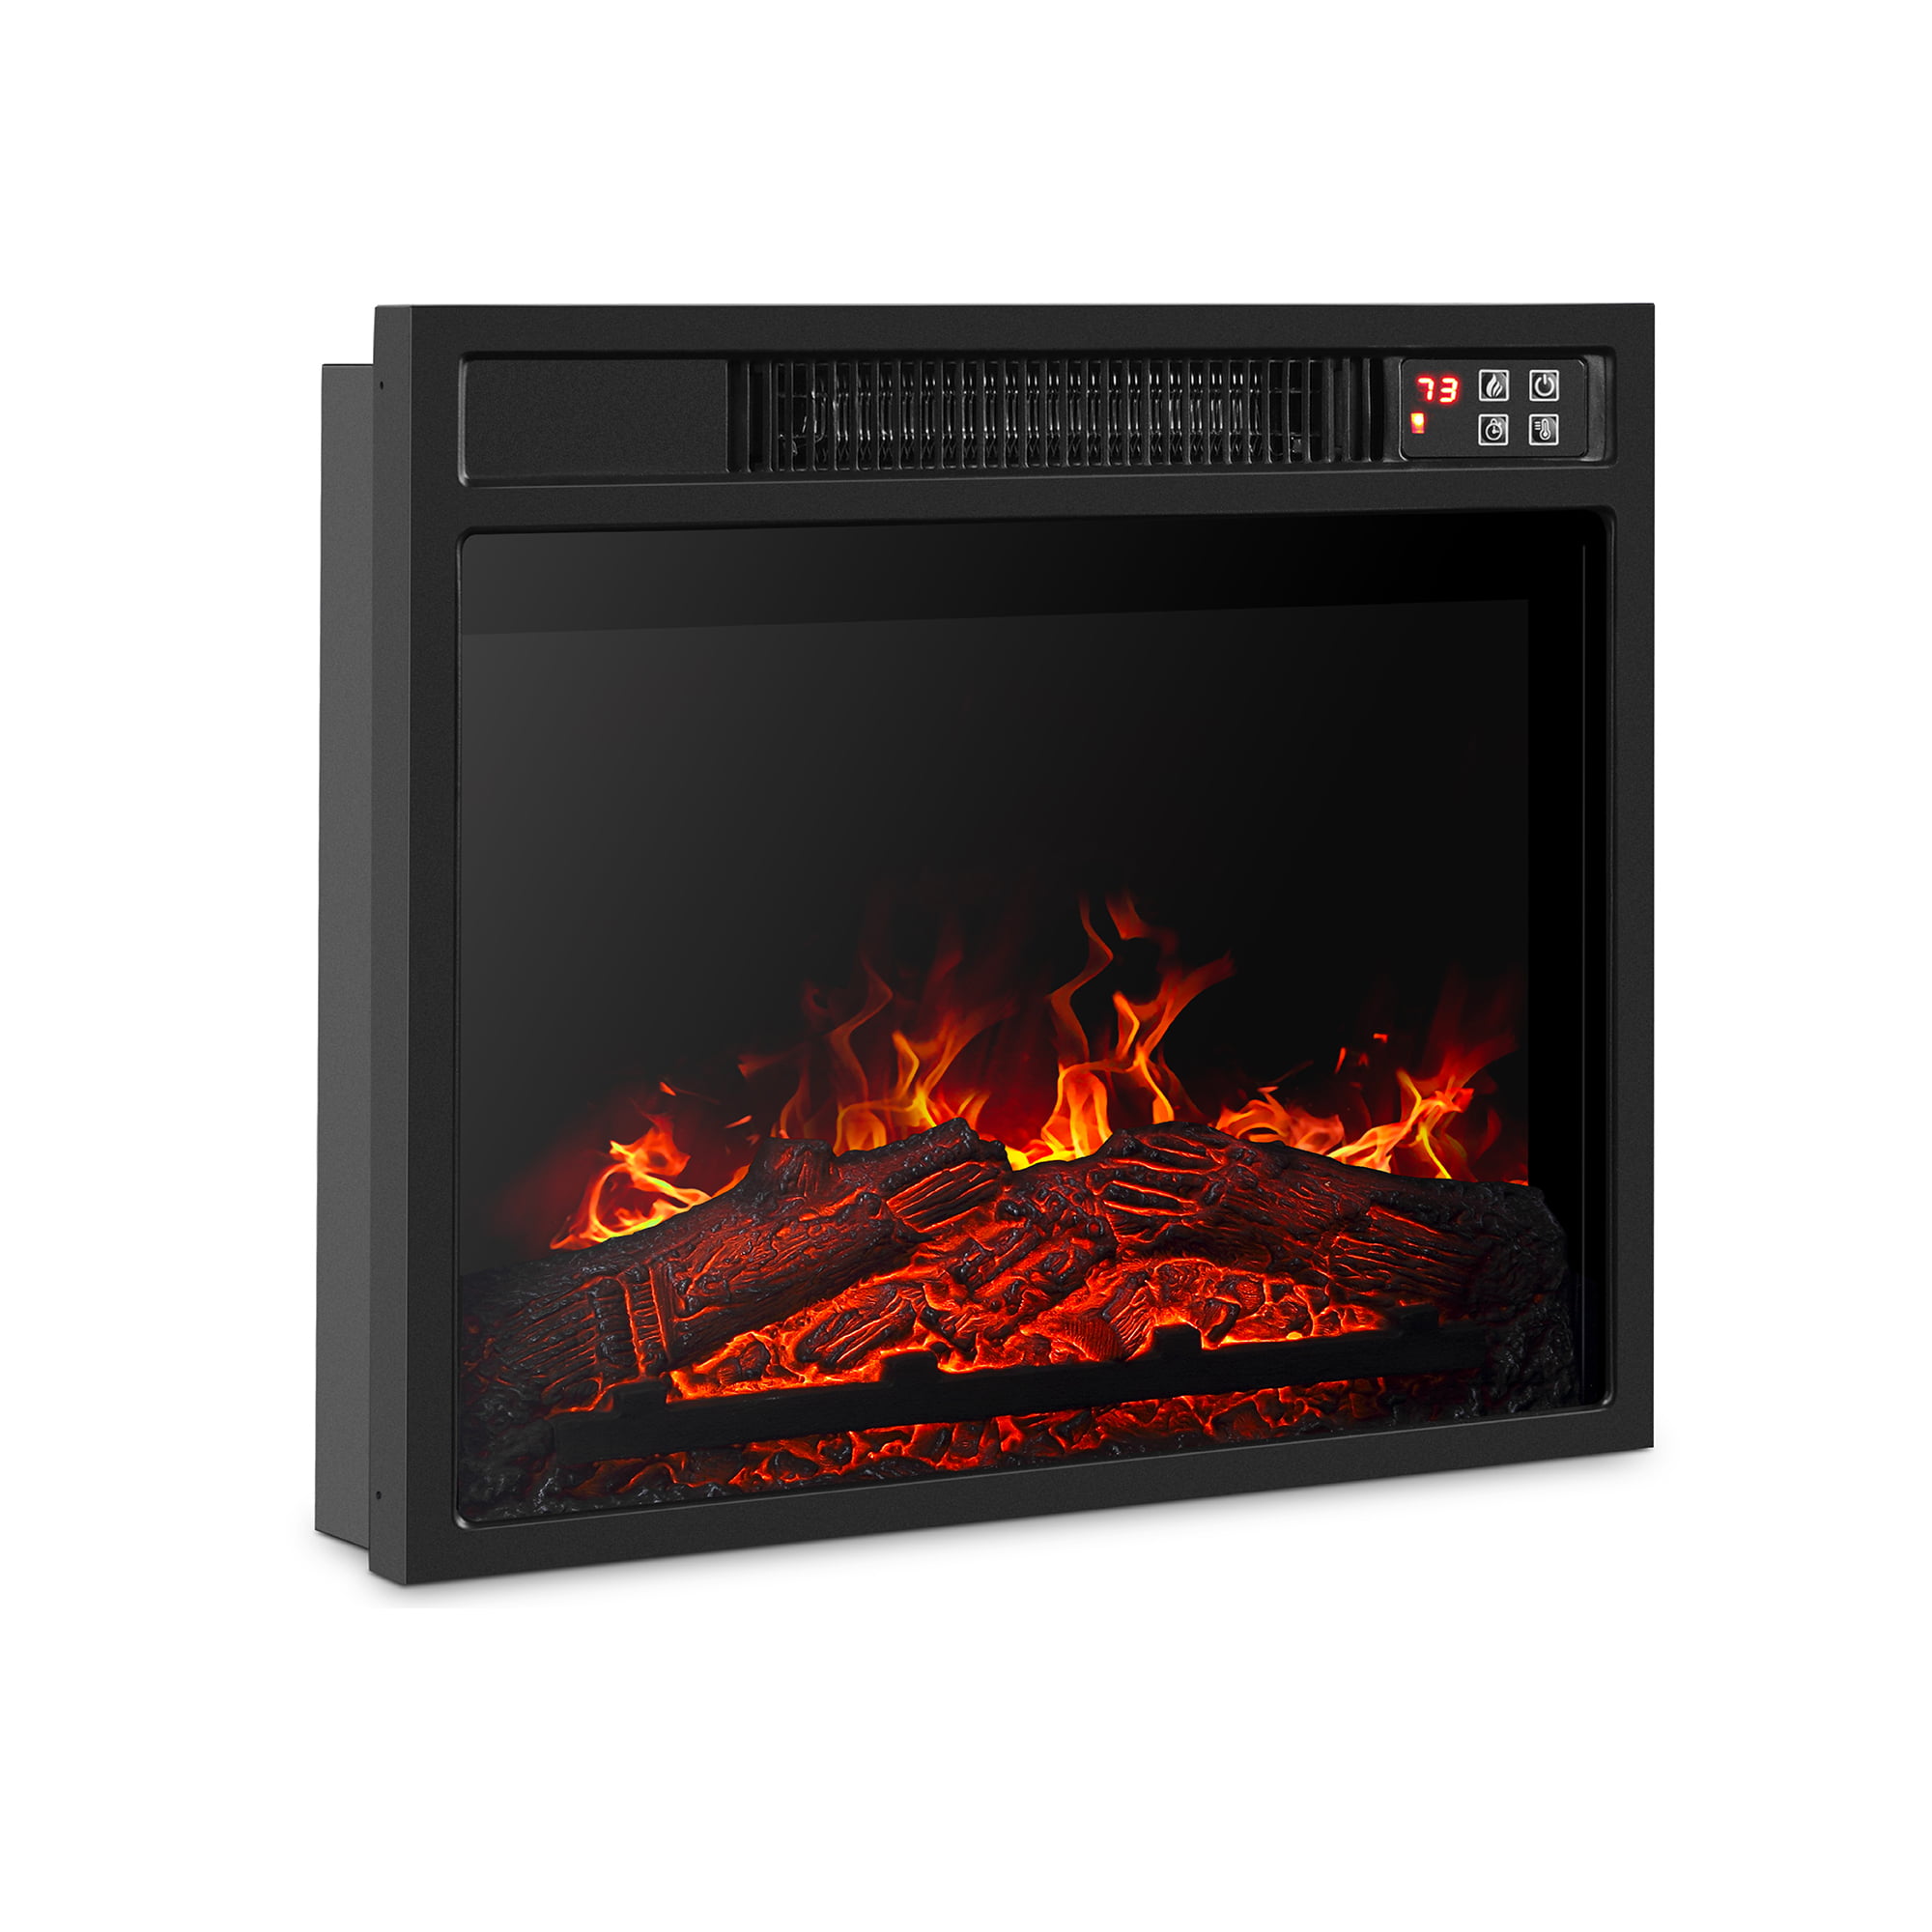 1400W Freestanding Electric Fireplace Insert Heater Glass View w/ Remote Control 